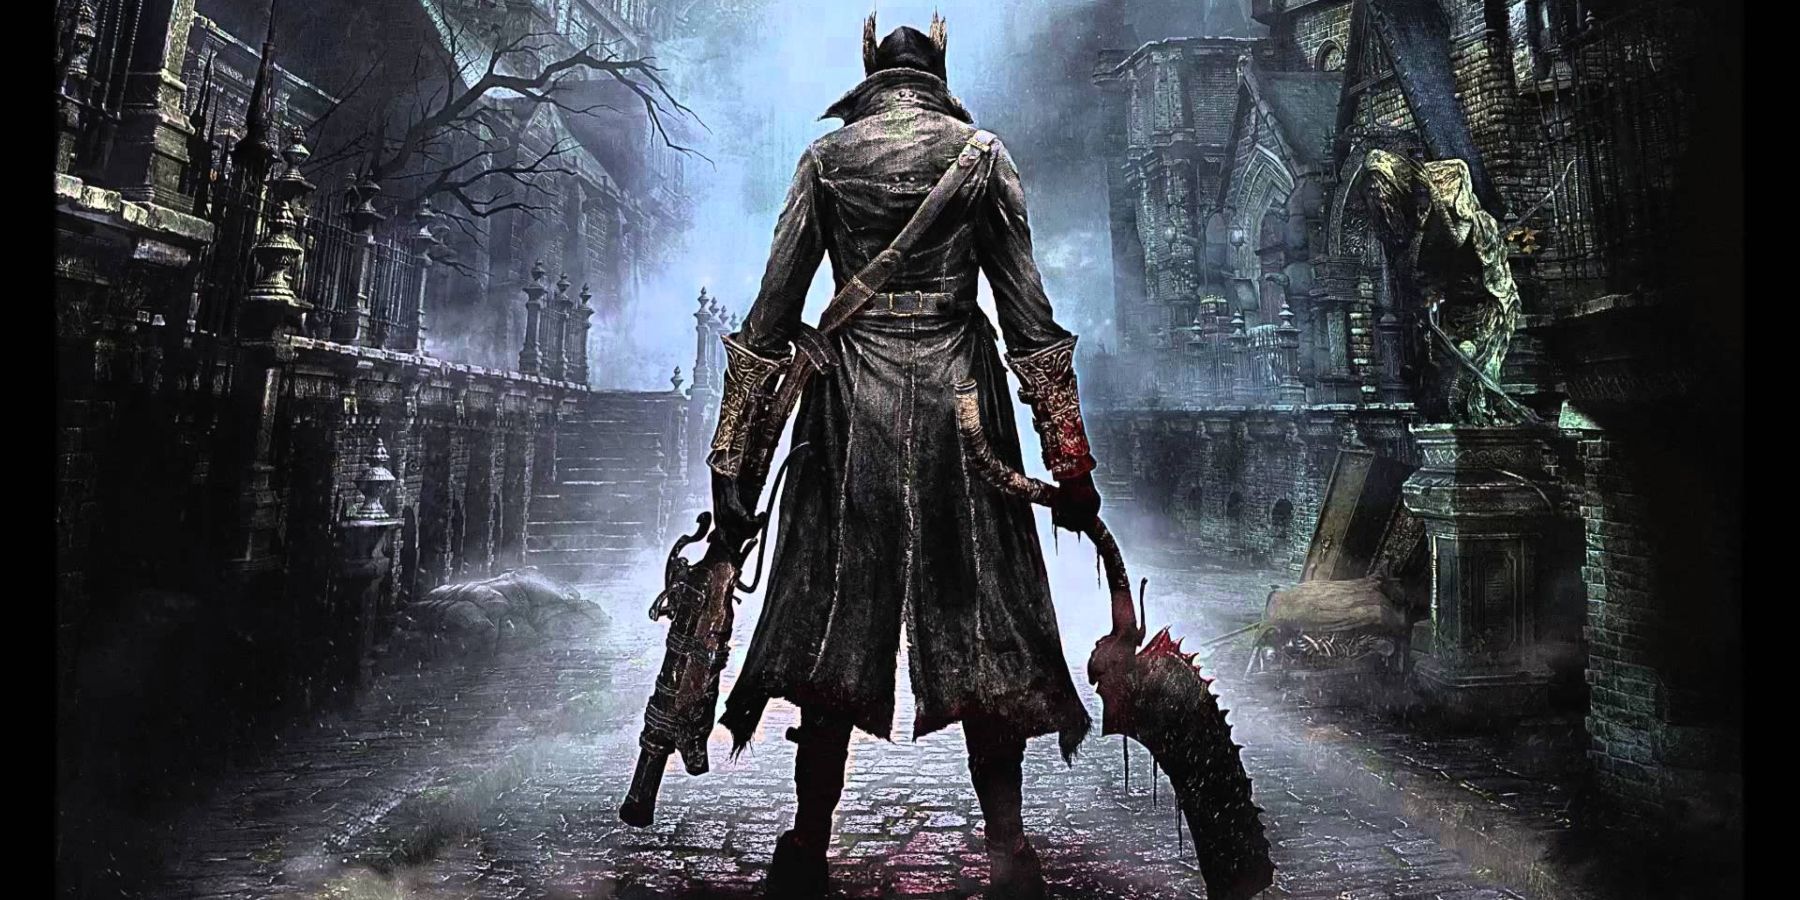 Bloodborne on PC Could Follow Another Unexpected PlayStation Port